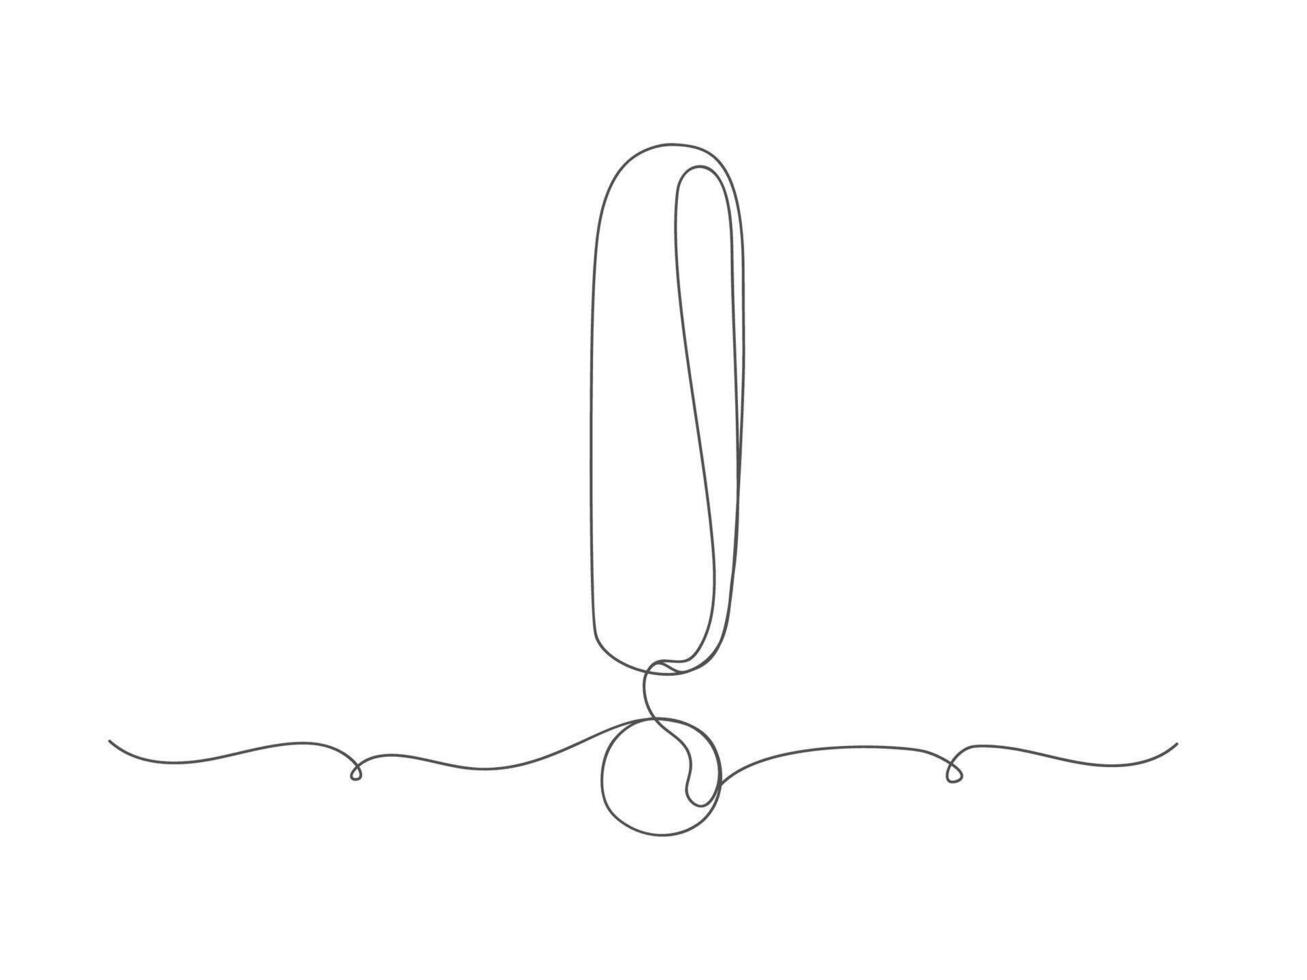 Exclamation mark in continuous one line art drawing isolated vector illustration.